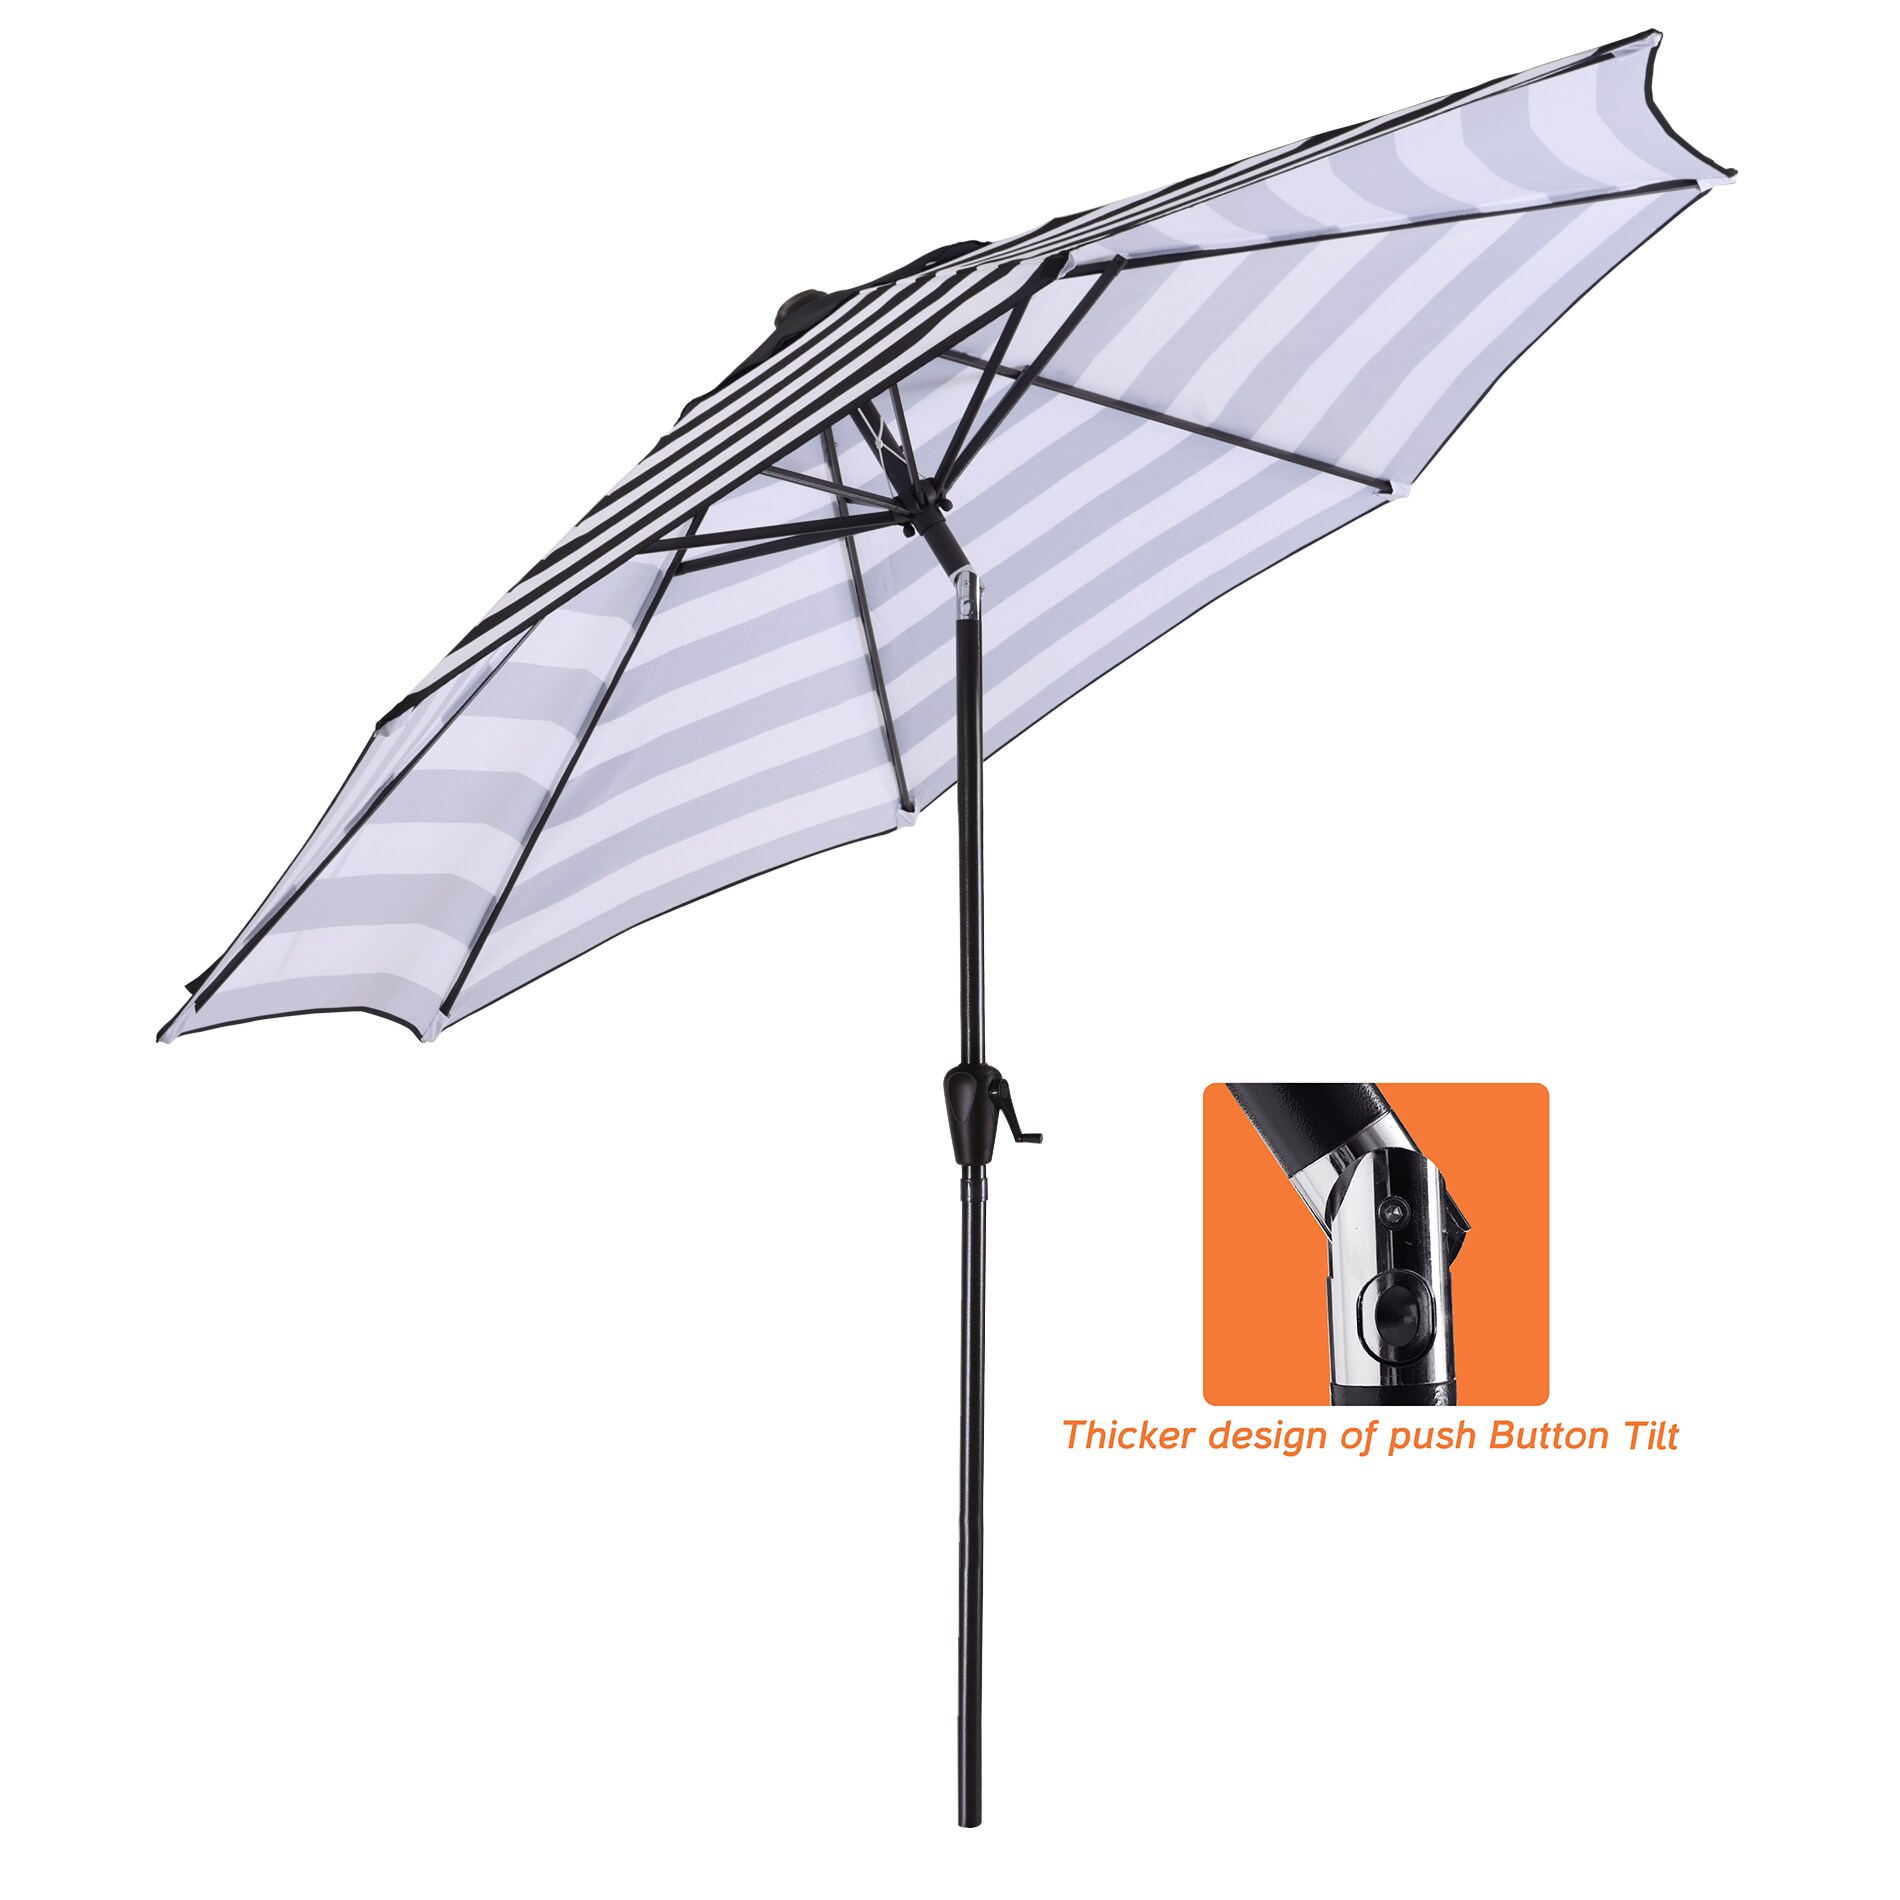 Clihome 9ft Patio Outdoor Table Umbrella with Push Button Tilt and Crank, Market  Umbrella with 8 Sturdy Steel Ribs in the Patio Umbrellas department at  Lowes.com